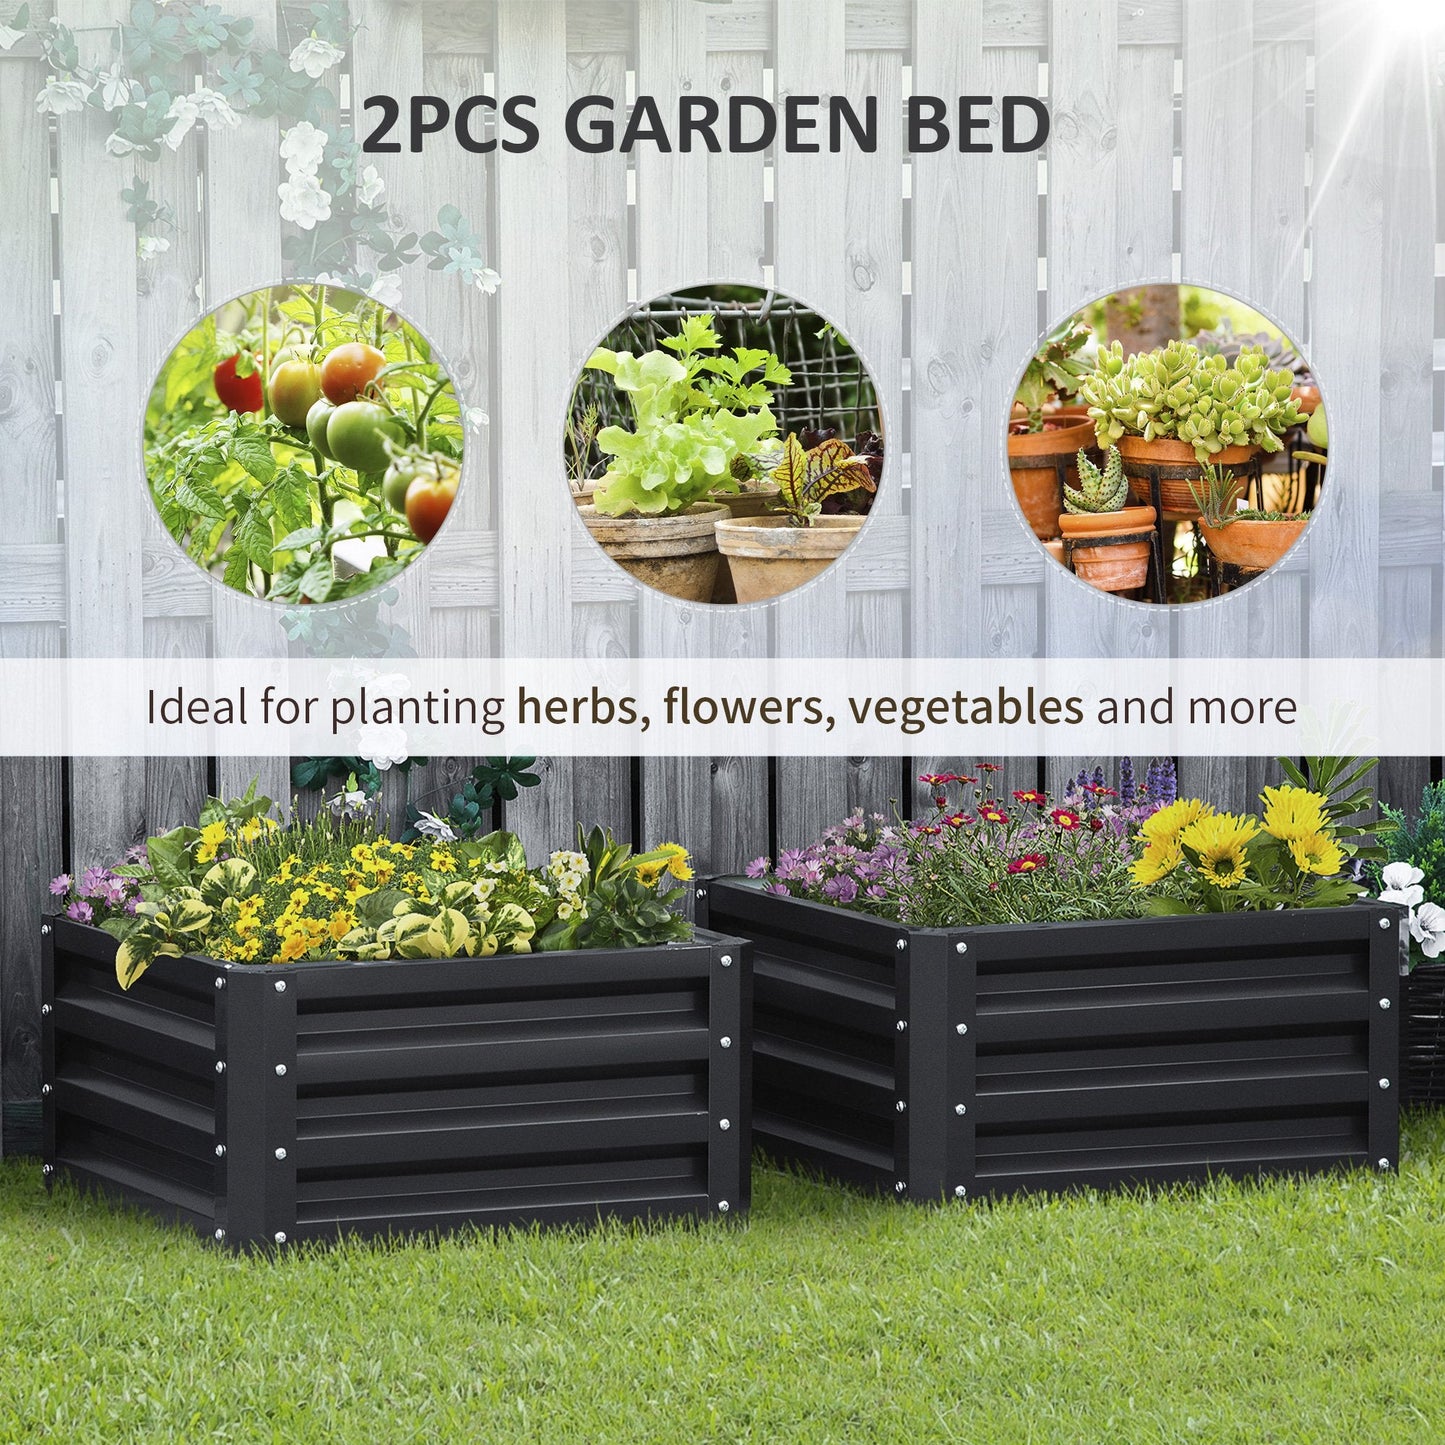 Outdoor and Garden-2' x 2' x 1' 2-Piece Raised Garden Bed Box with Steel Frame for Vegetables, Flowers & Herbs, Gray - Outdoor Style Company